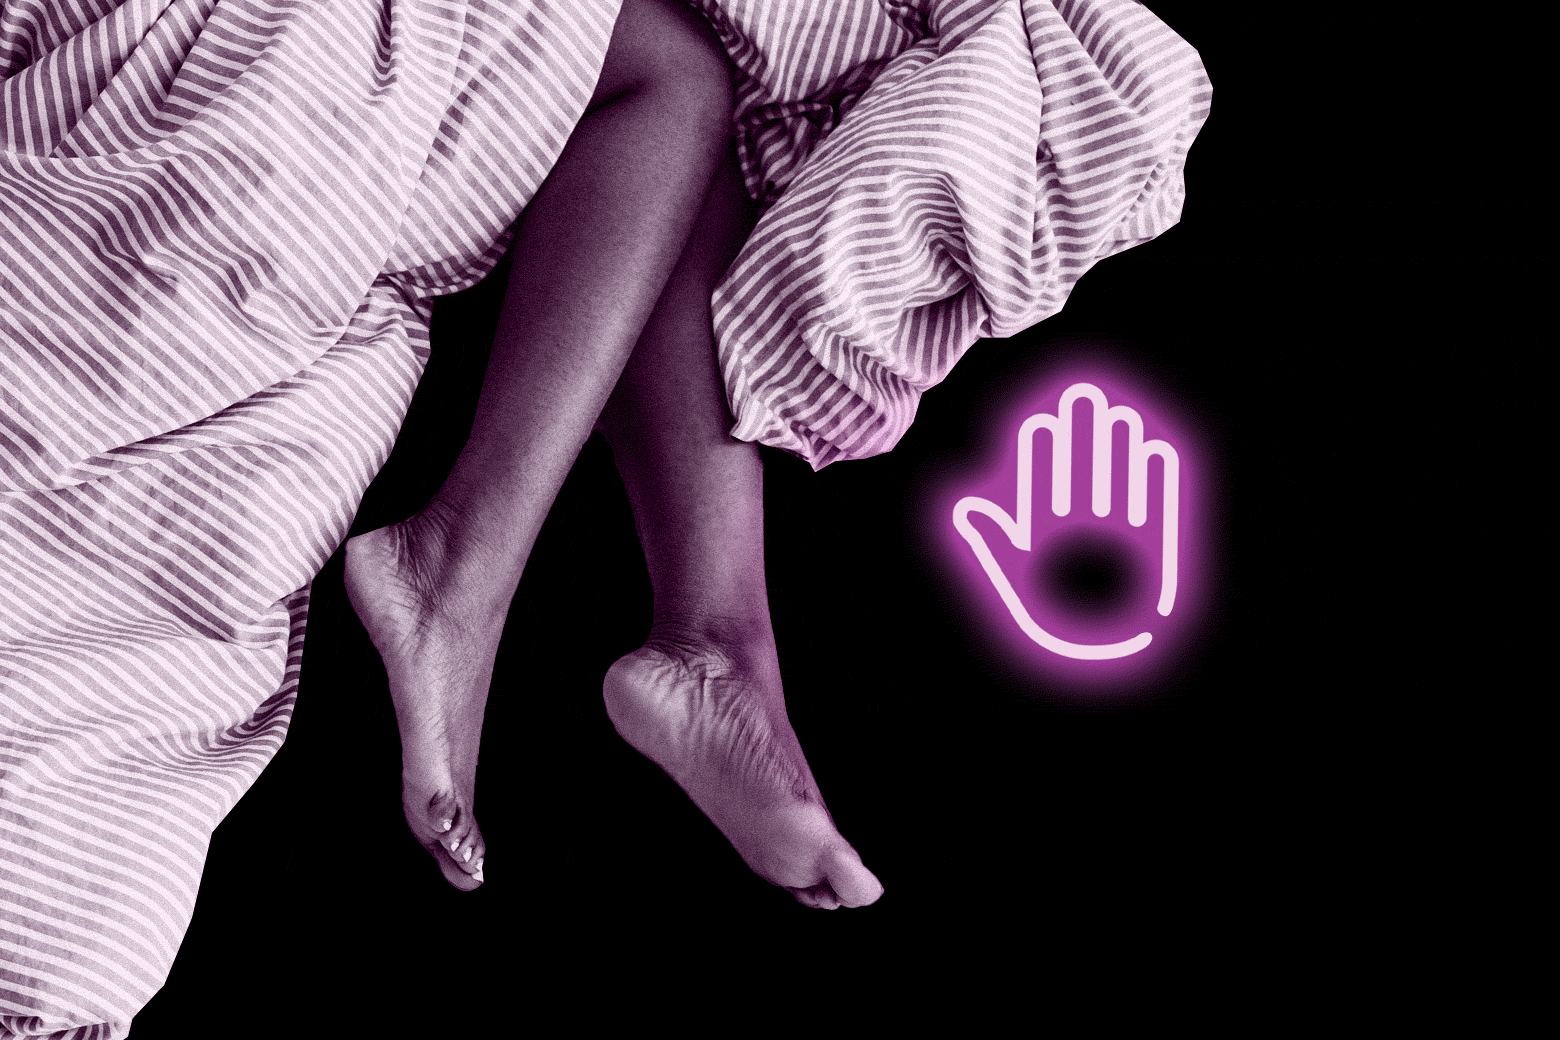 A woman's legs poke out from under a duvet, next to a neon "stop" hand.